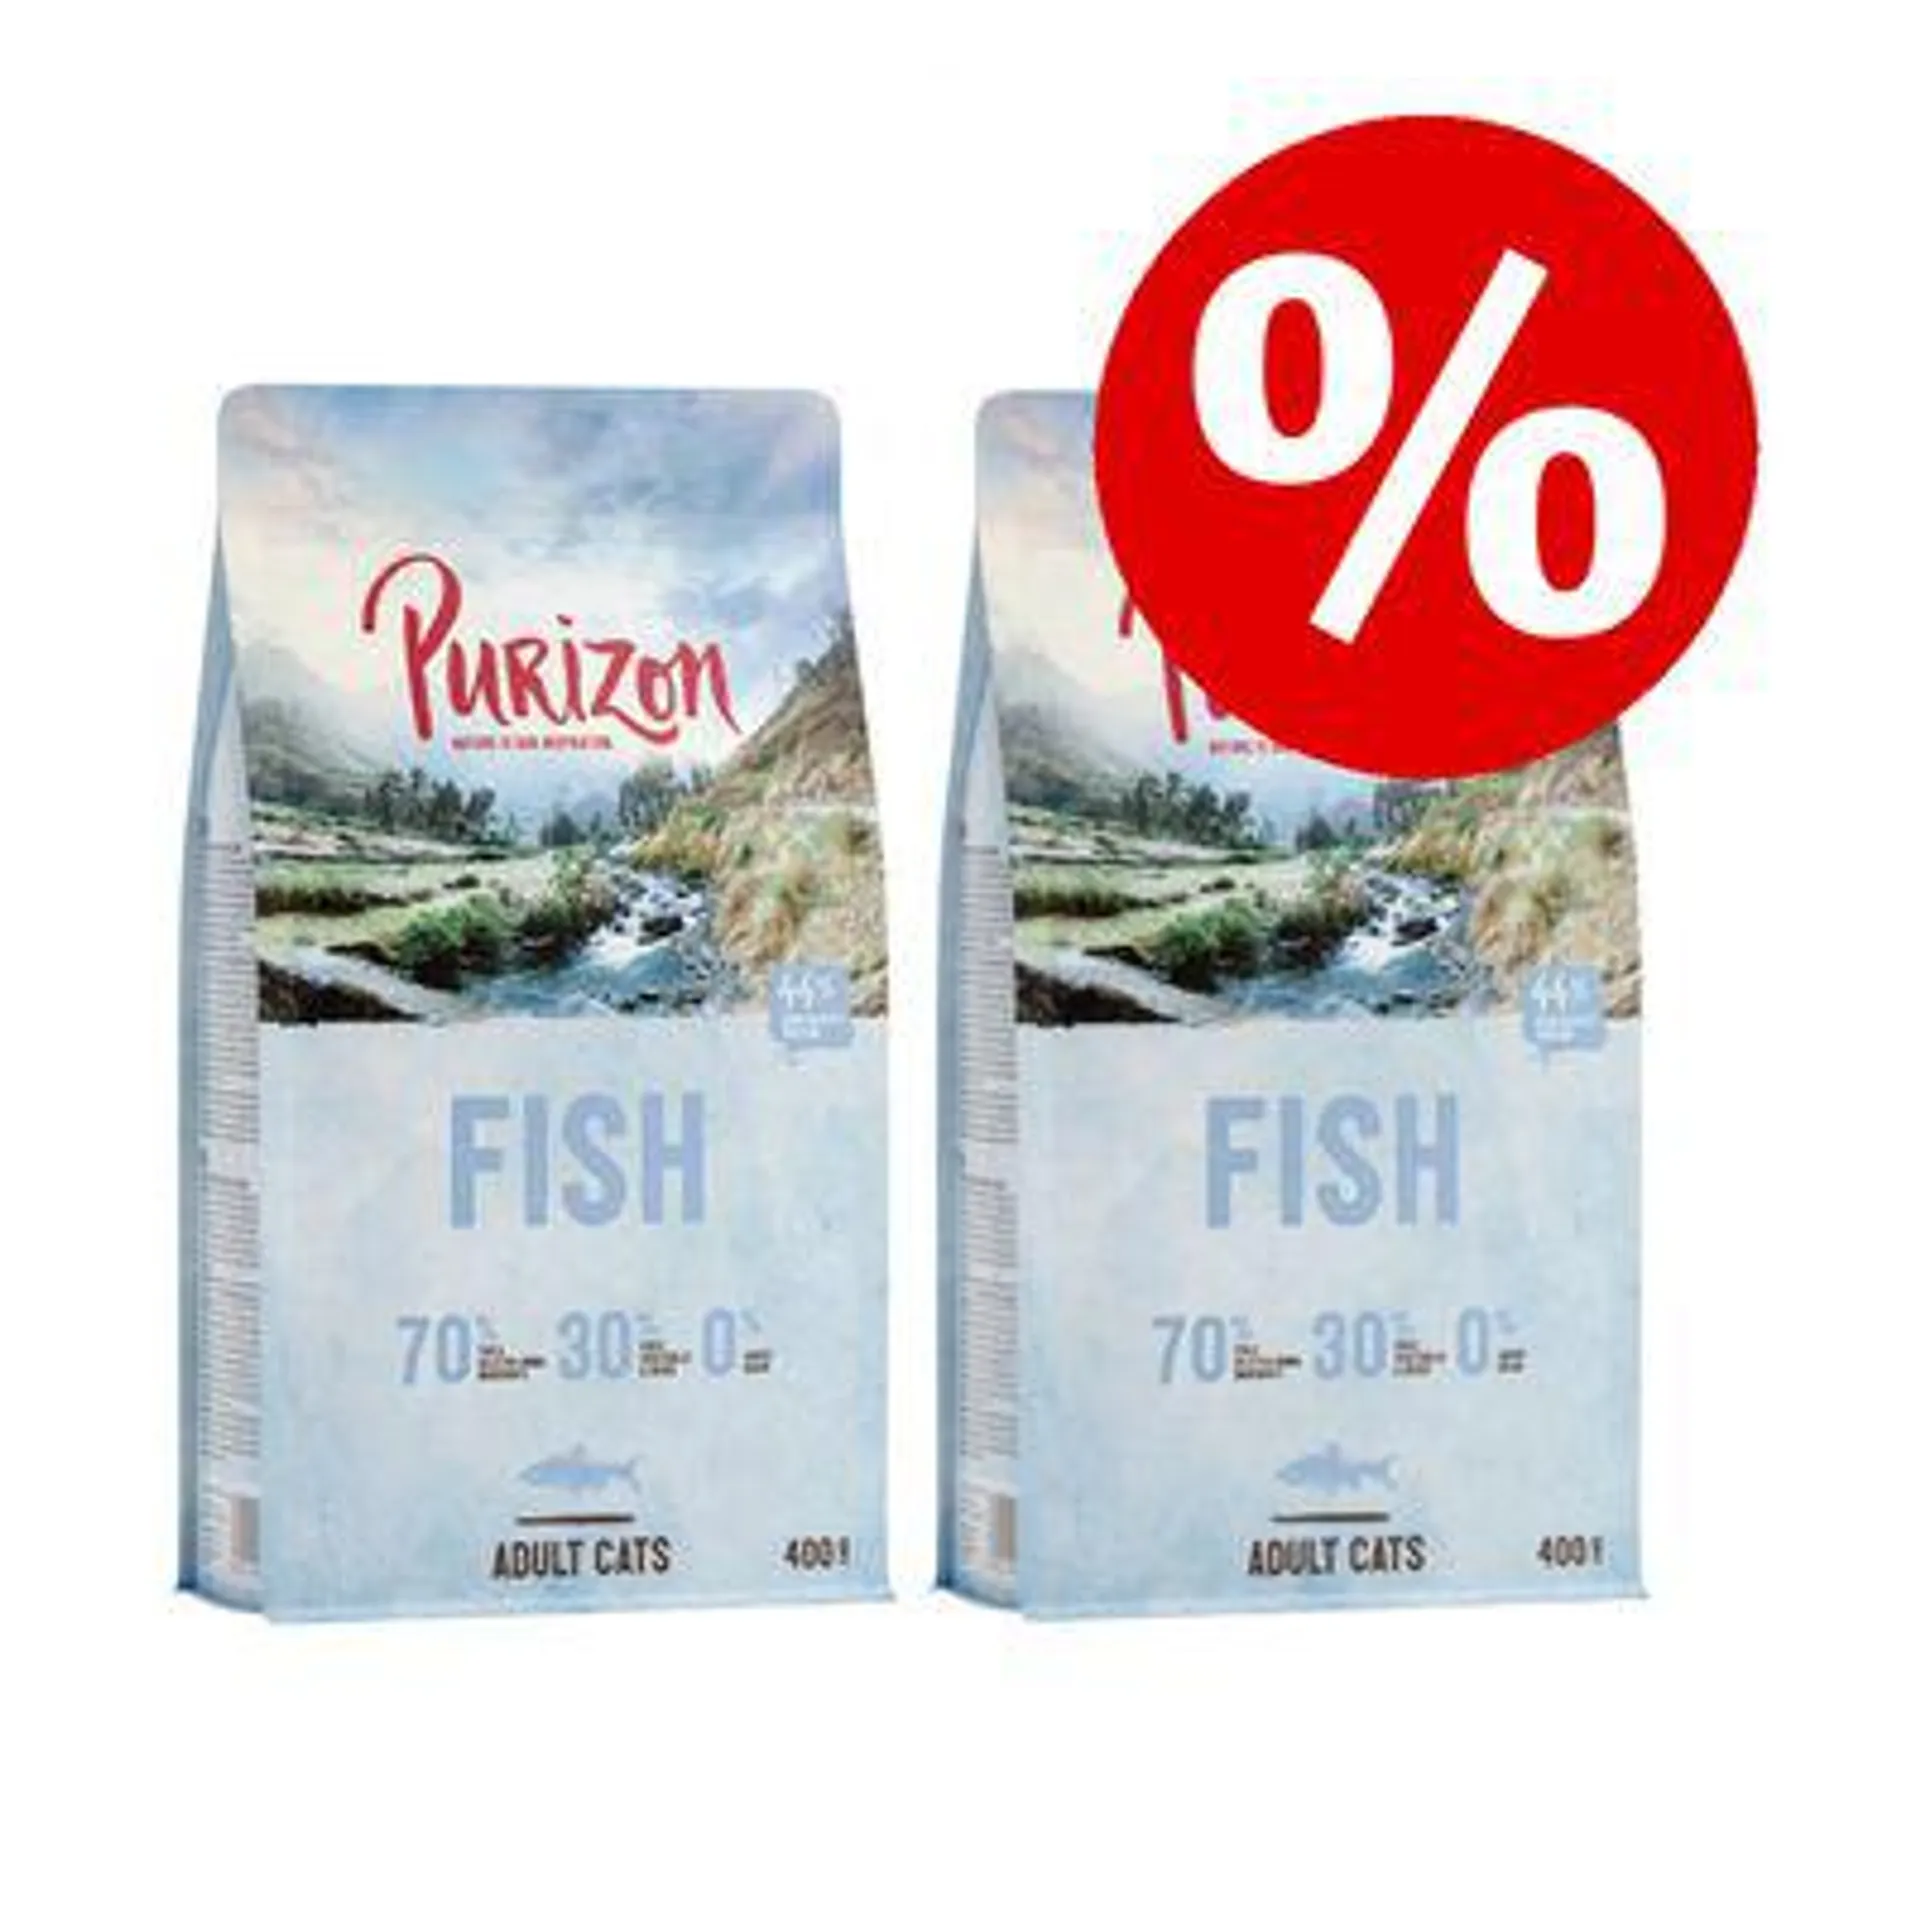 2 x 400g Purizon Kitten/Adult Dry Cat Food - Special Price! *